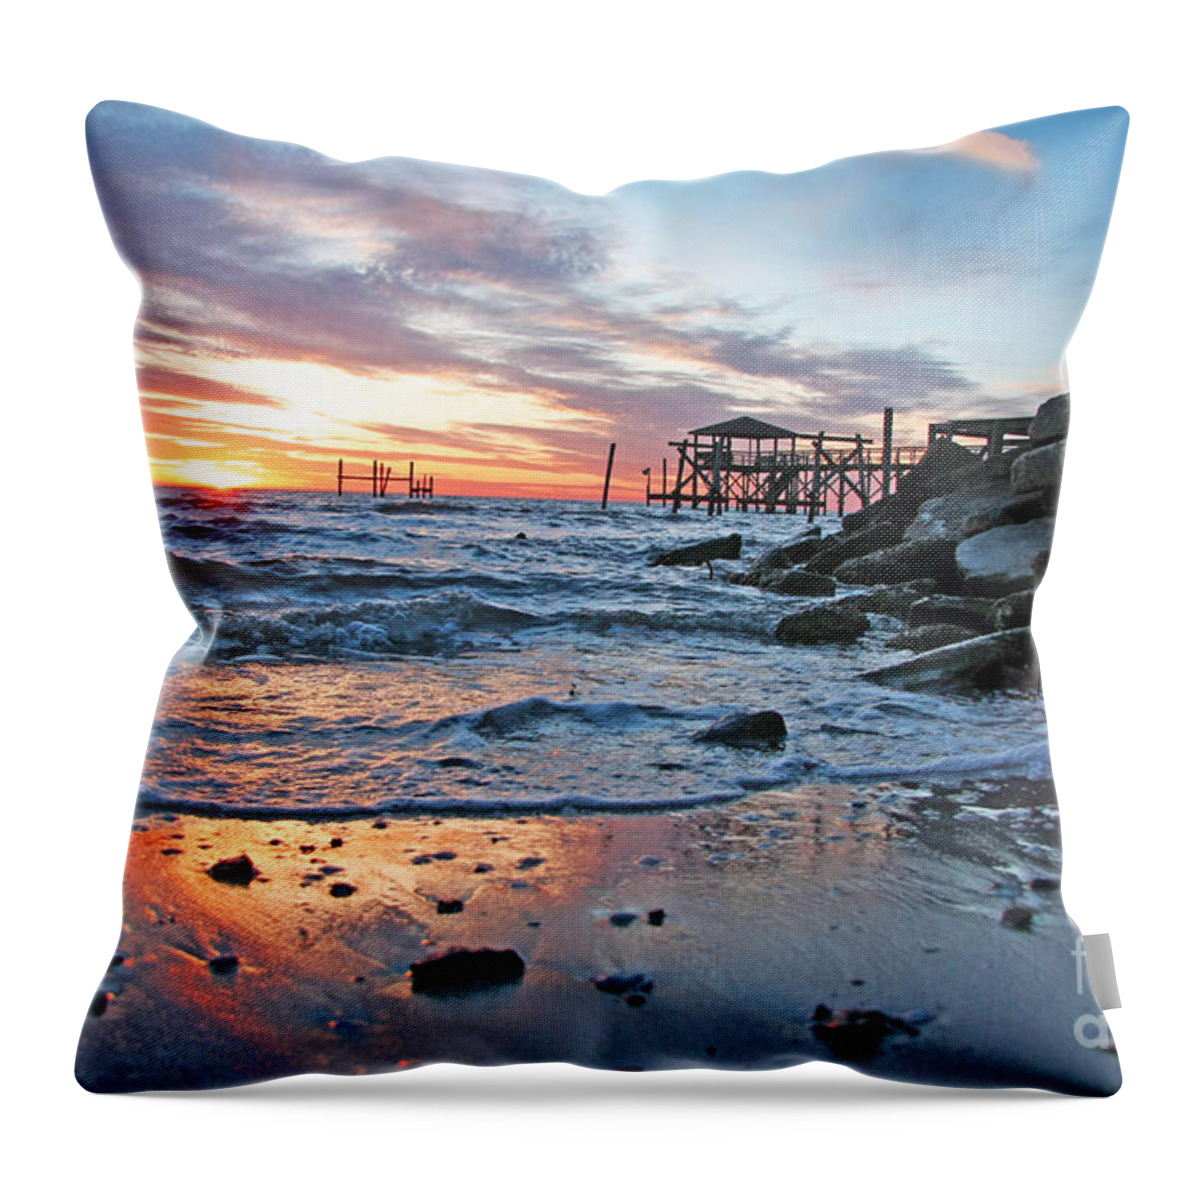 Sunset Photography Throw Pillow featuring the photograph Lake Ponchartrain Sunset by Luana K Perez